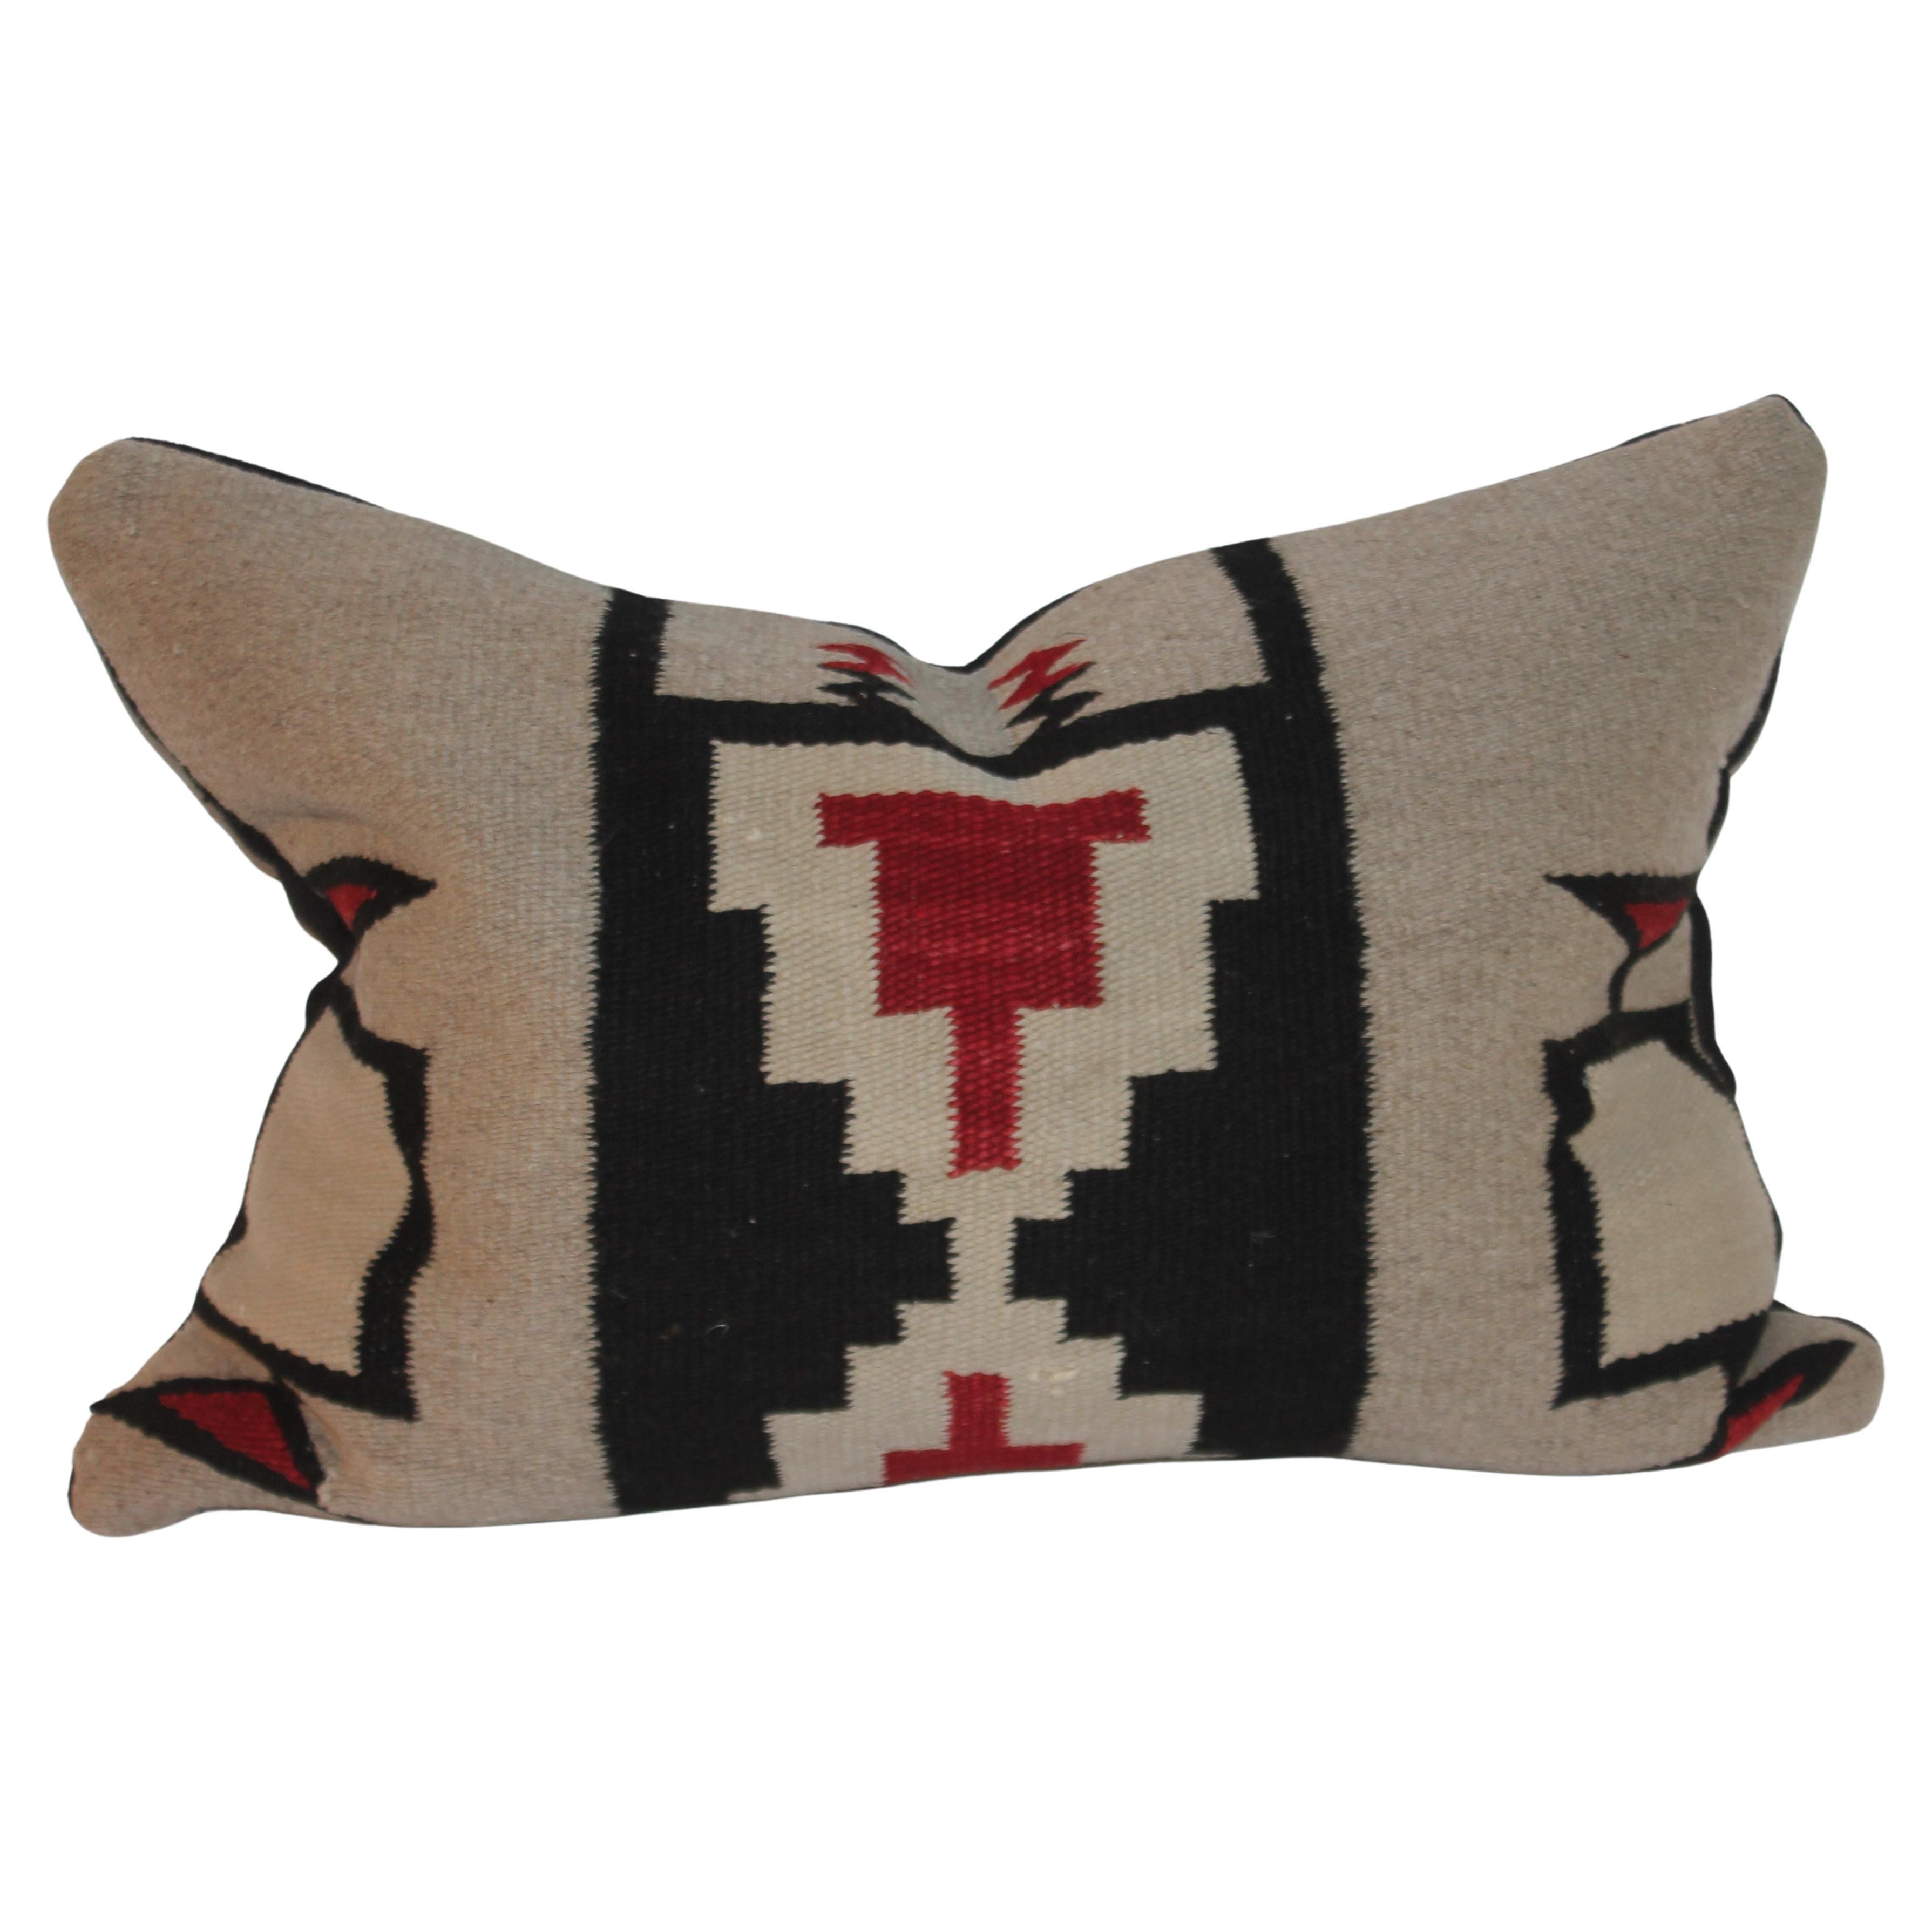 Aztec Design Mexican Indian Weaving Pillow For Sale